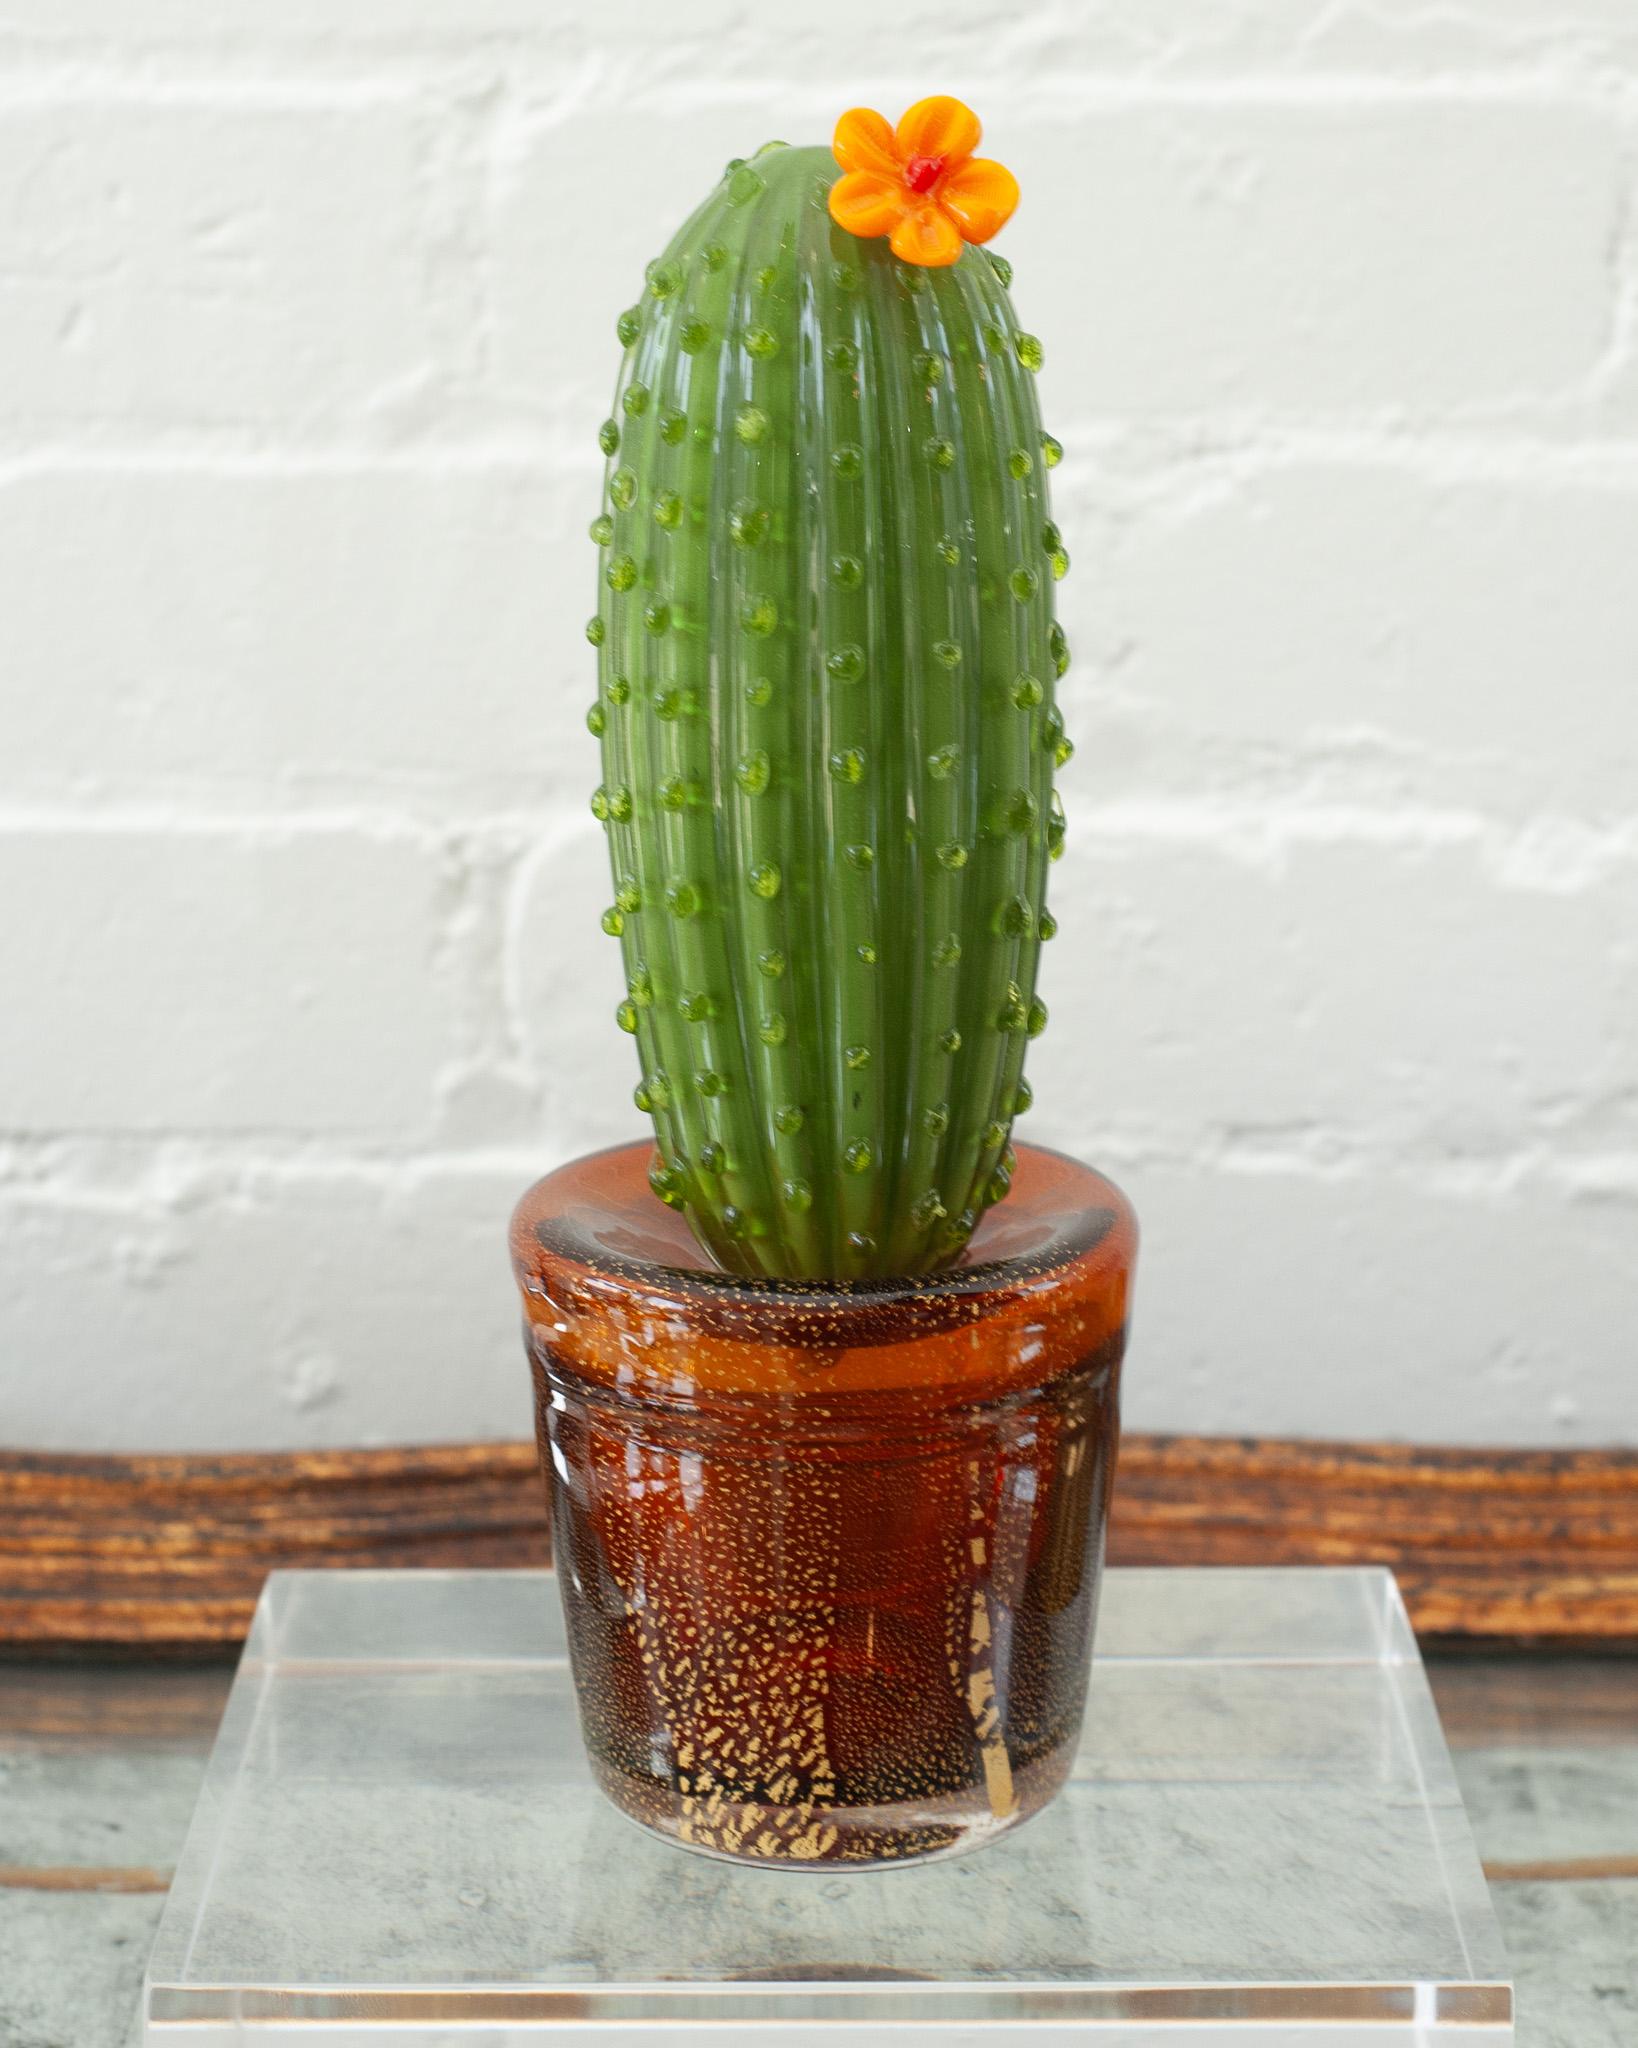 A stunning vintage murano glass cactus circa 1990 just arrived at Maison Nurita. Entirely handblown in glass, this unusual and vibrant sculpture is attributed to the famed Italian fashion and jewelry designer, Marta Marzotto.

